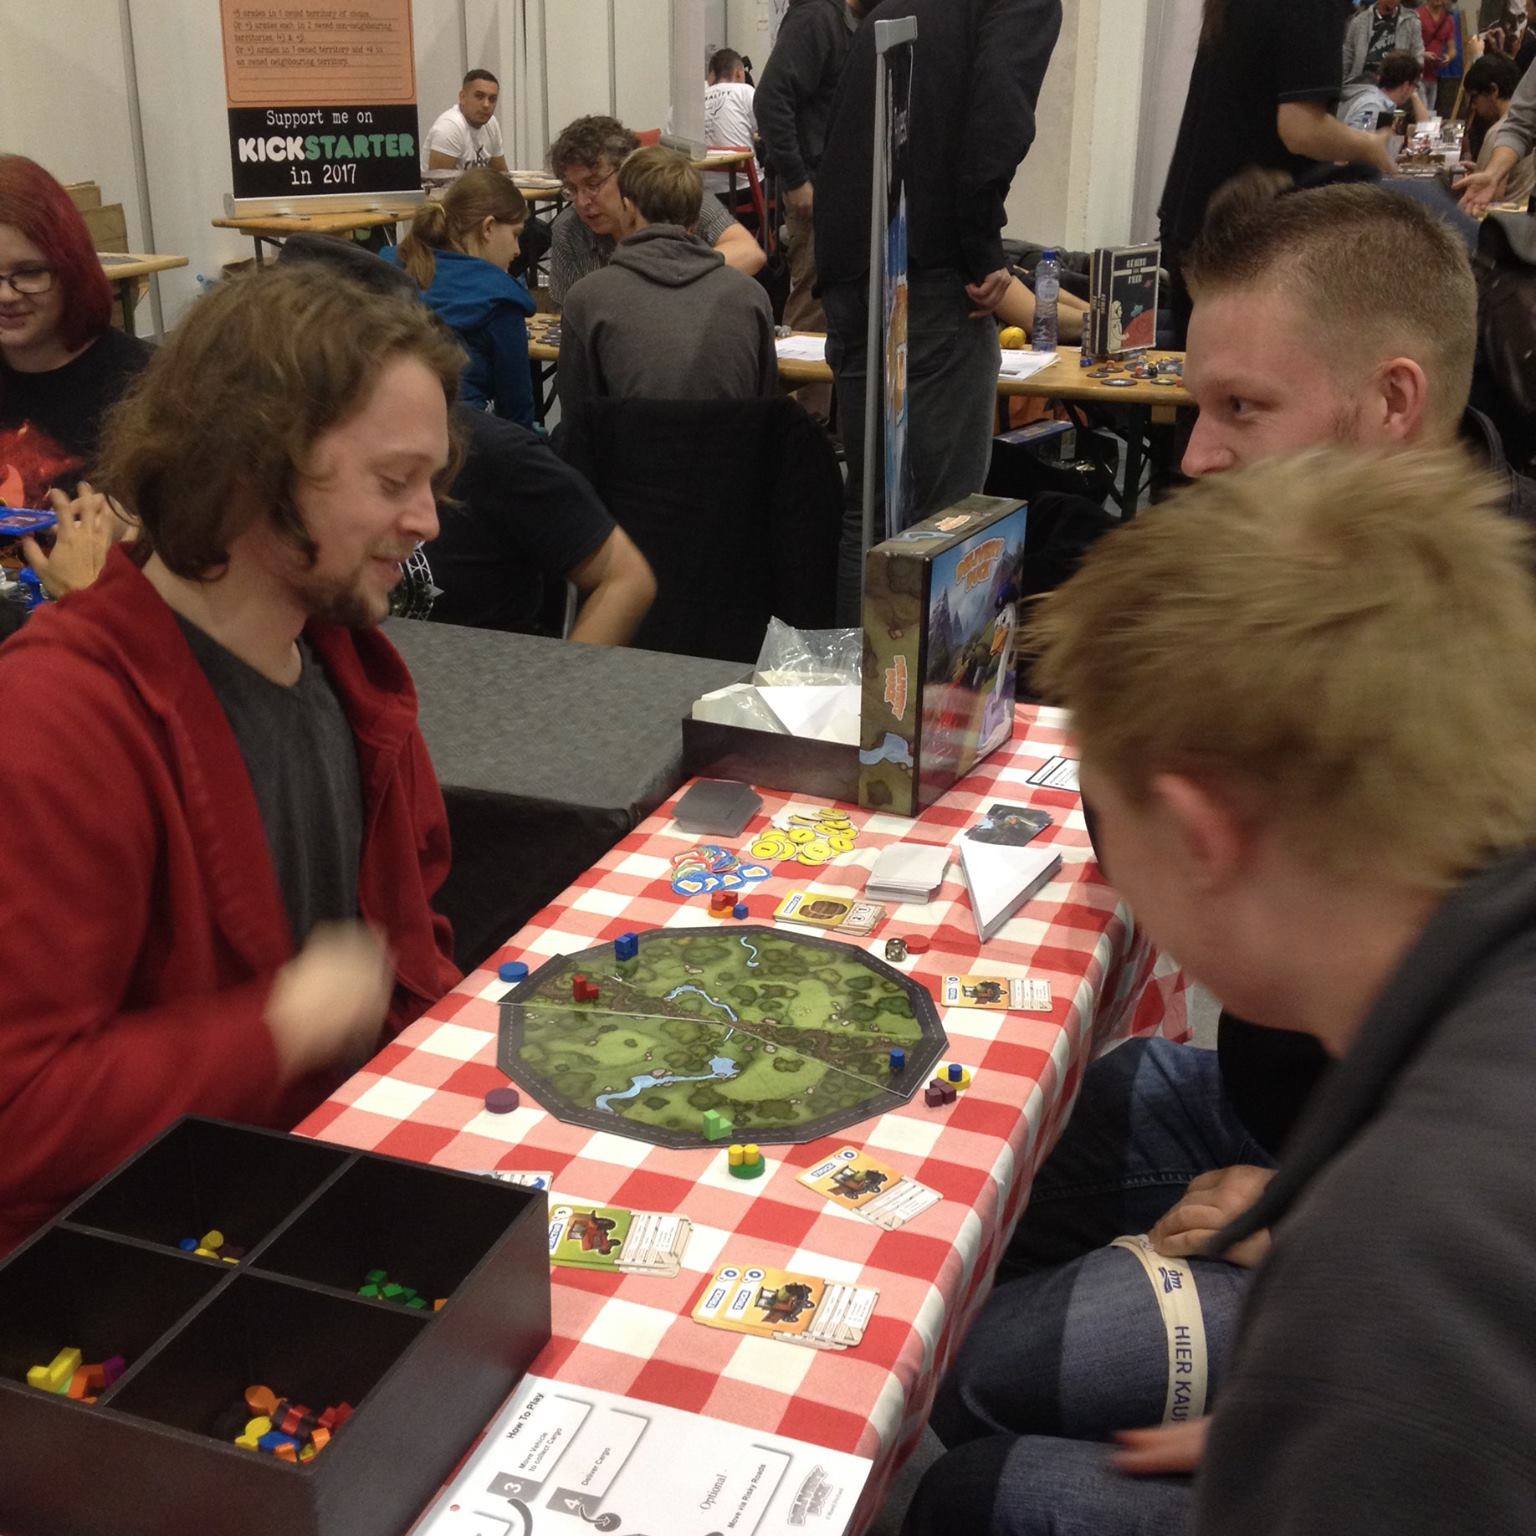 Delivery Duck at SPIEL 2016